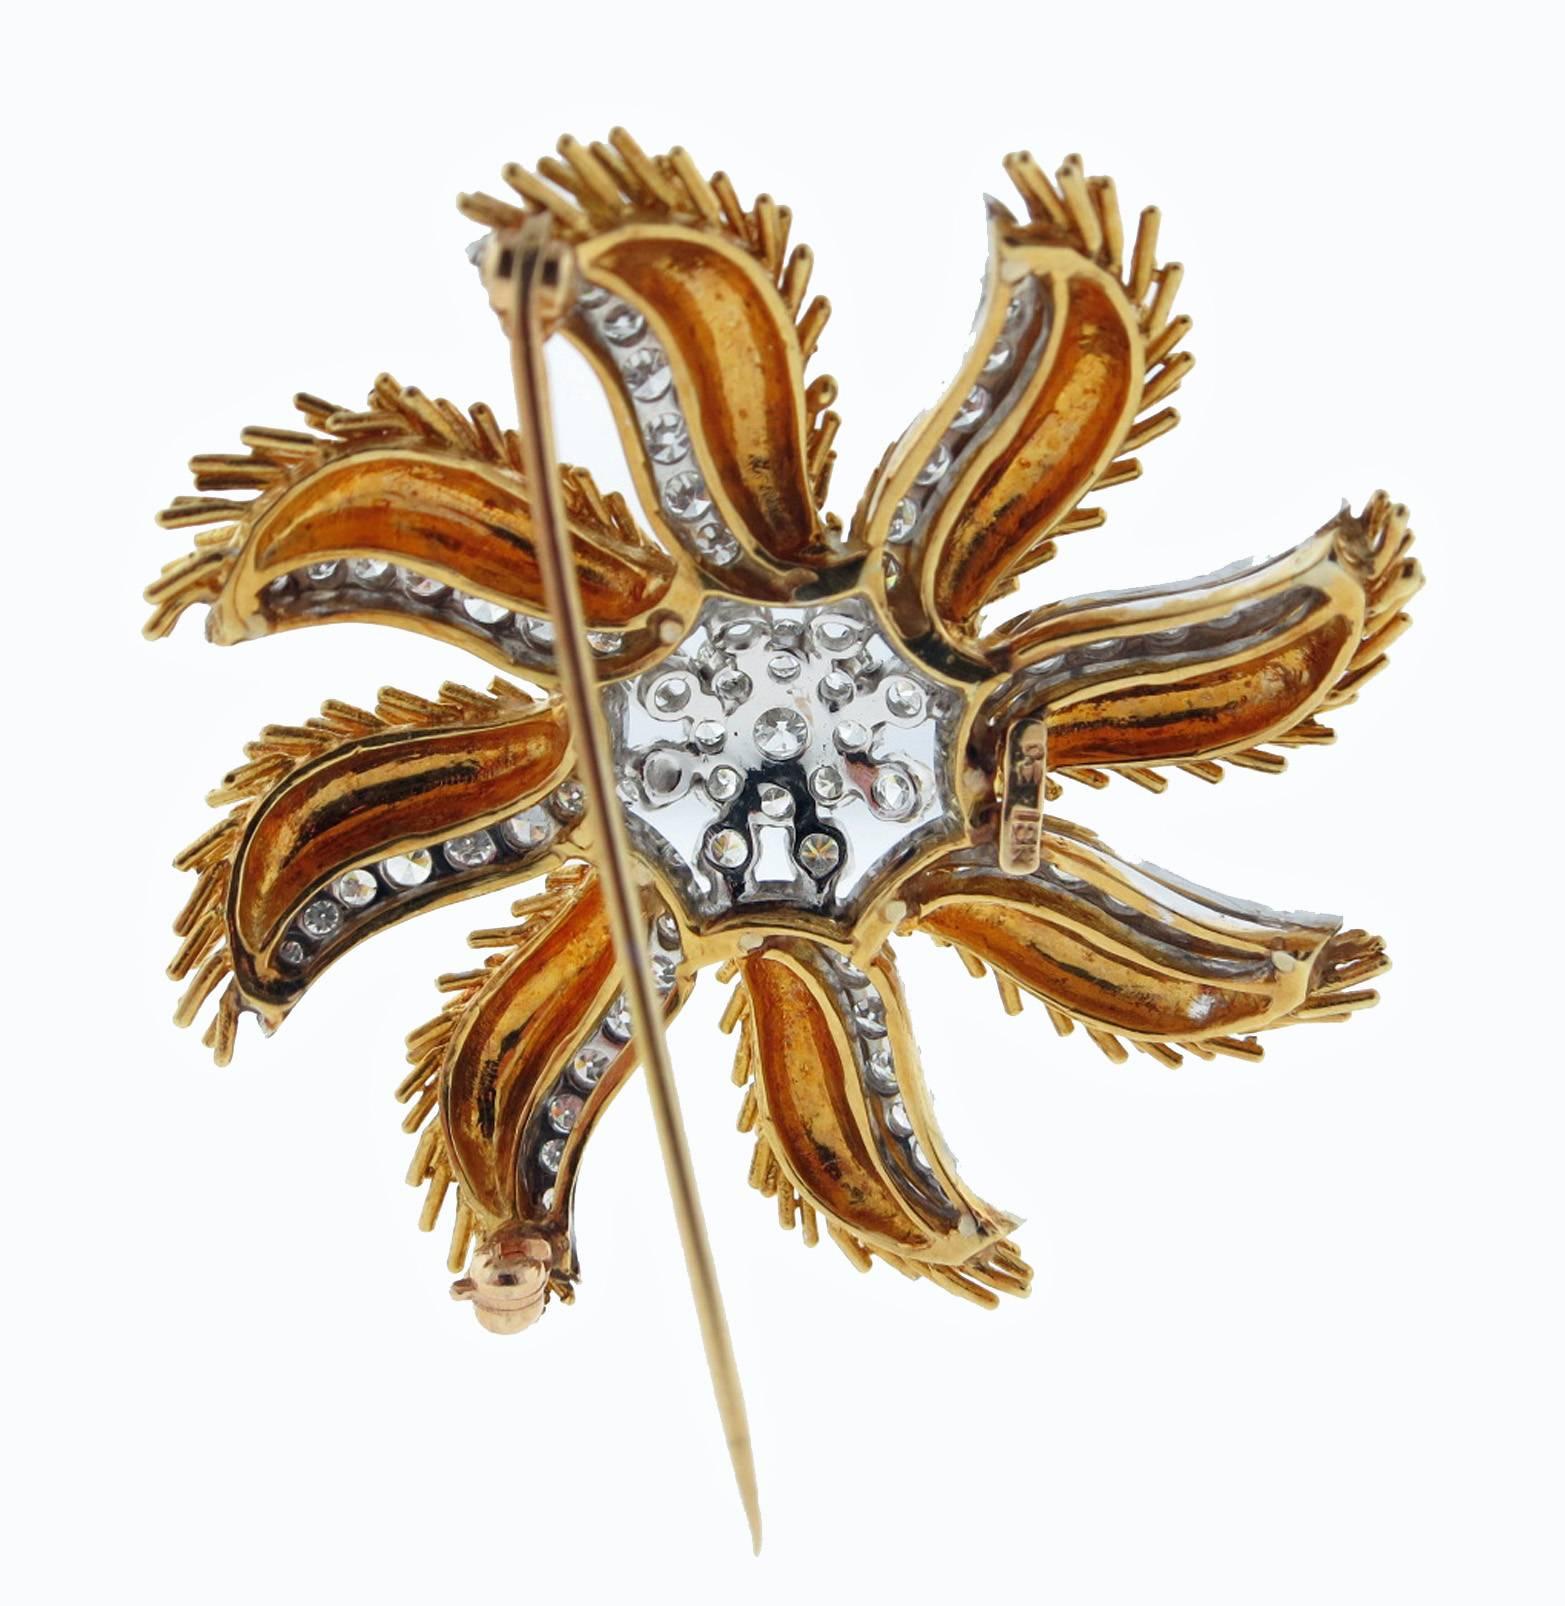 Dazzling quality 18kt. yellow gold brooch in a pinwheel design. The center cluster is prong set in white gold with 16 round brilliant cut diamonds and bead set  with 56 round diamonds radiating from the center. Total diamond weight approx 2.2 cts.